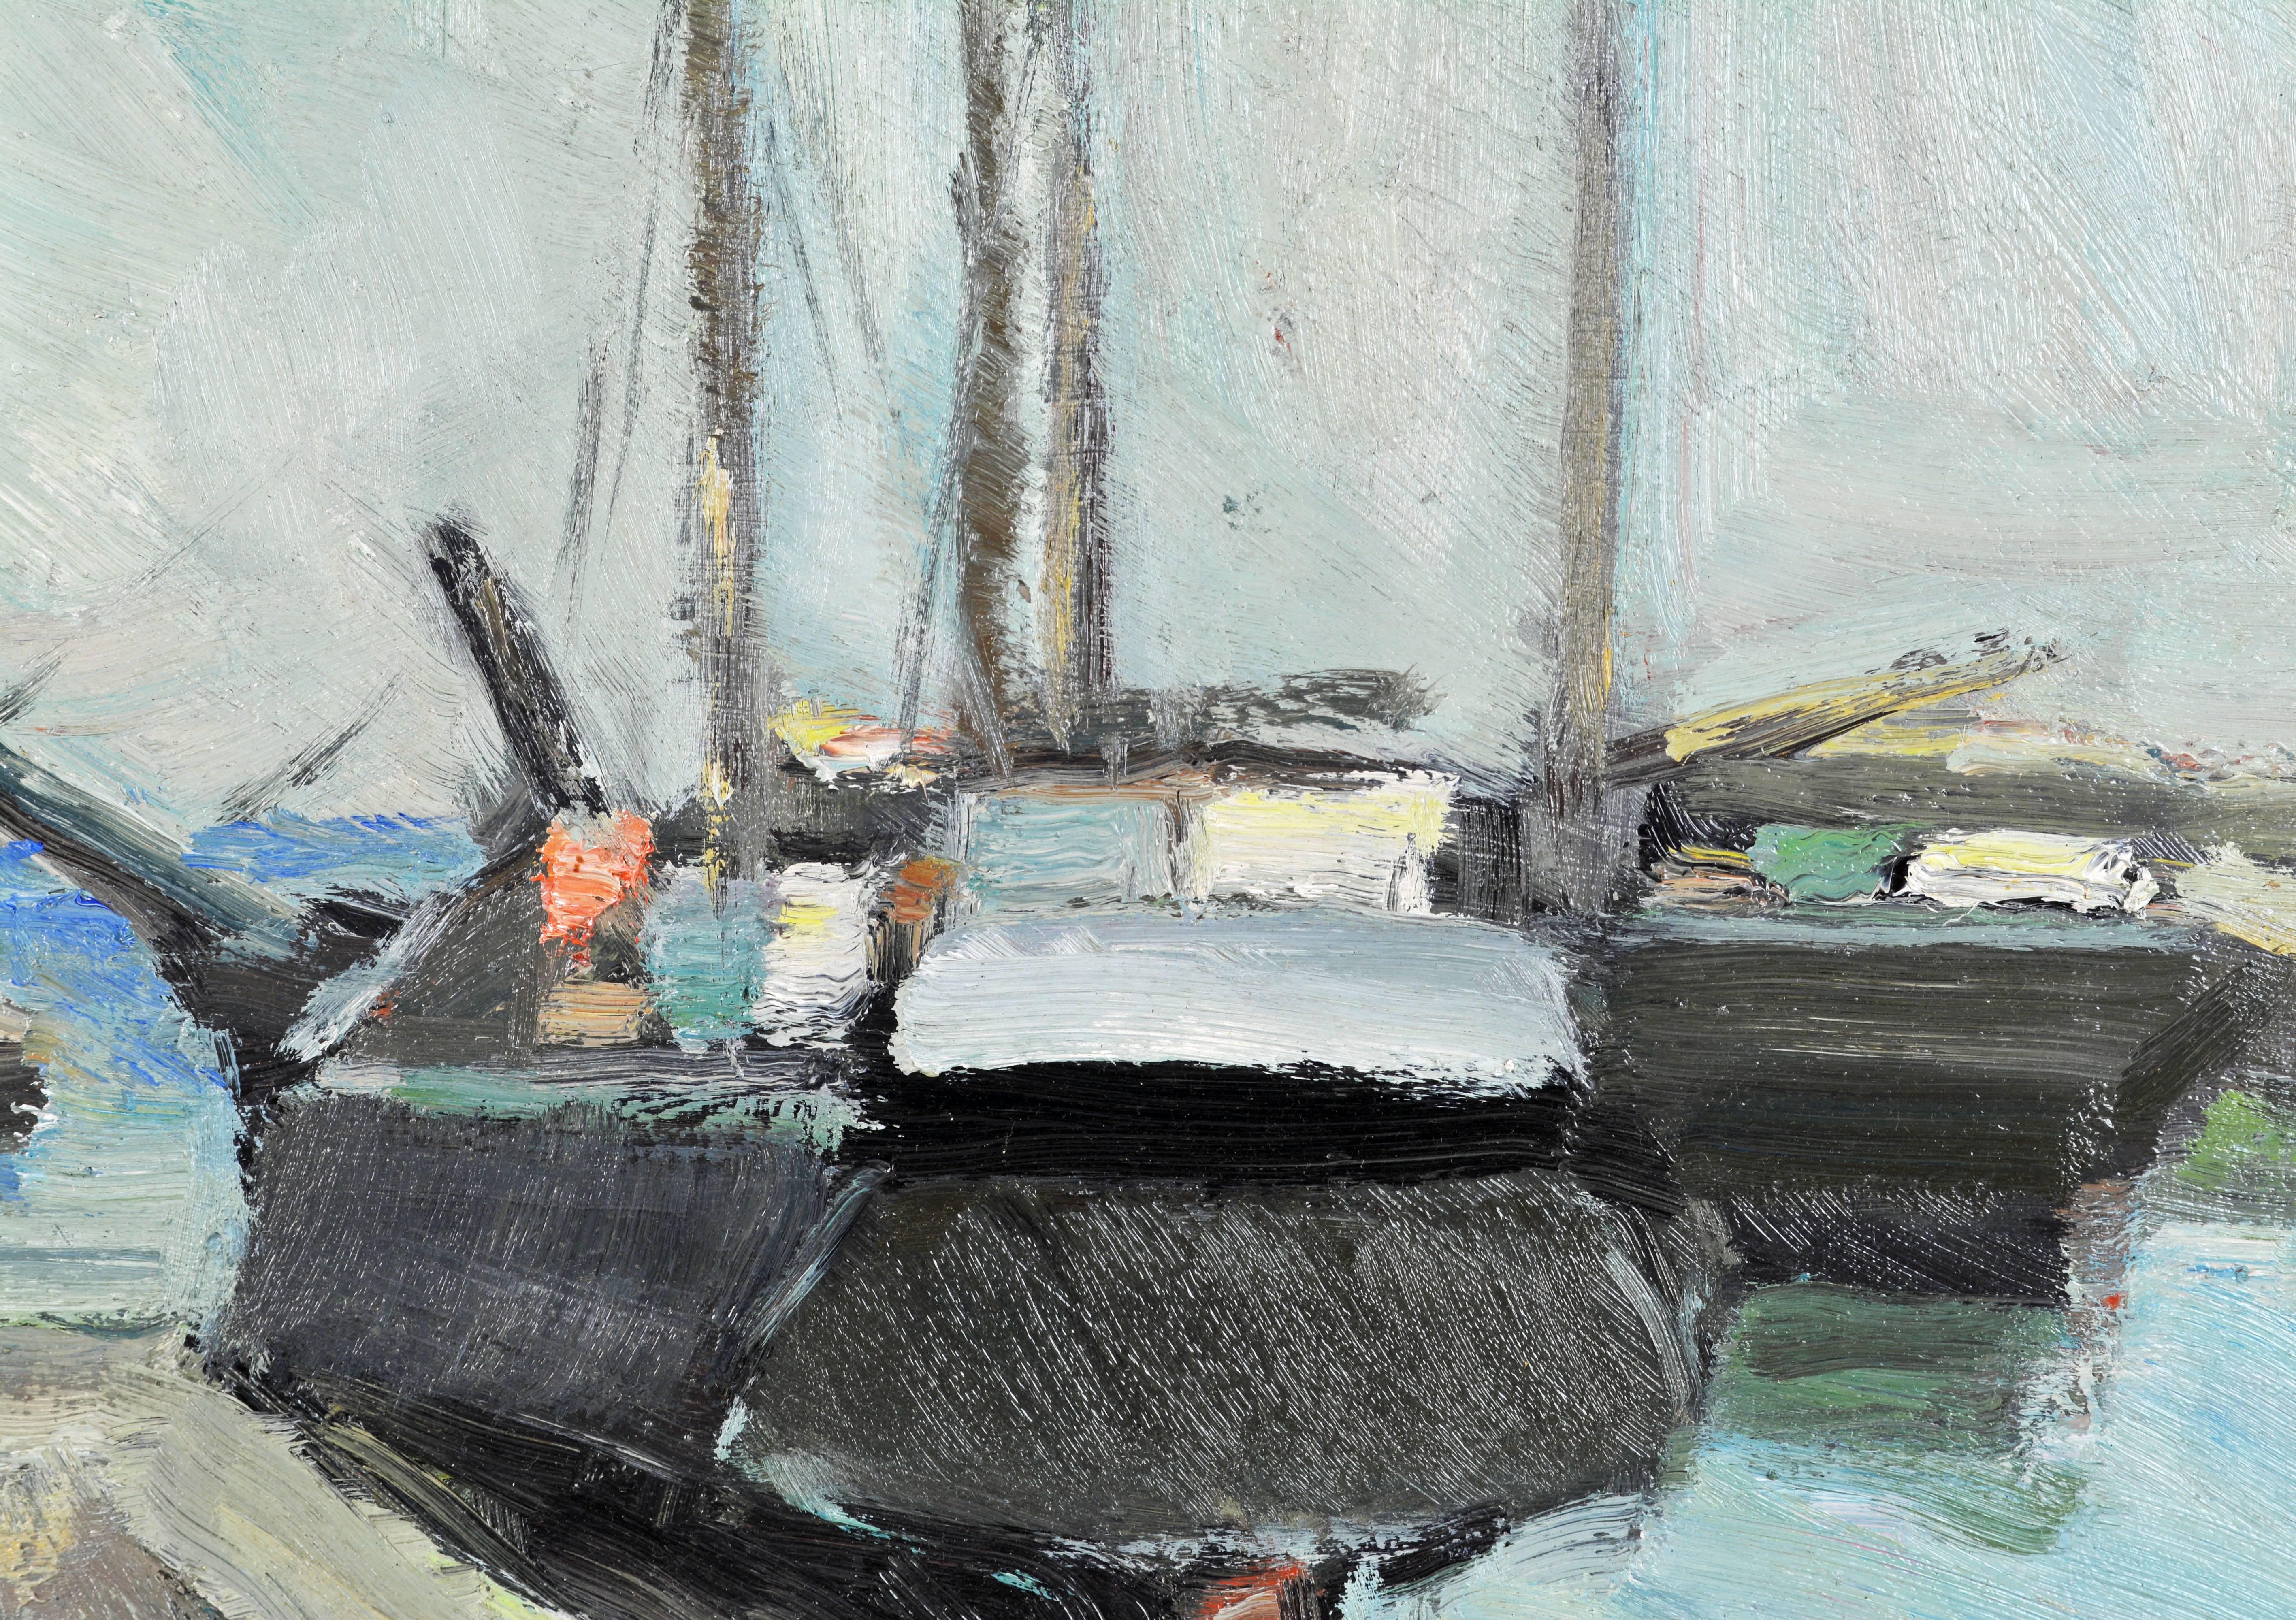 Mid-Century Modern 'The Old Boats in Harbor' Original Oil by Carl Berndtsson, Swedish